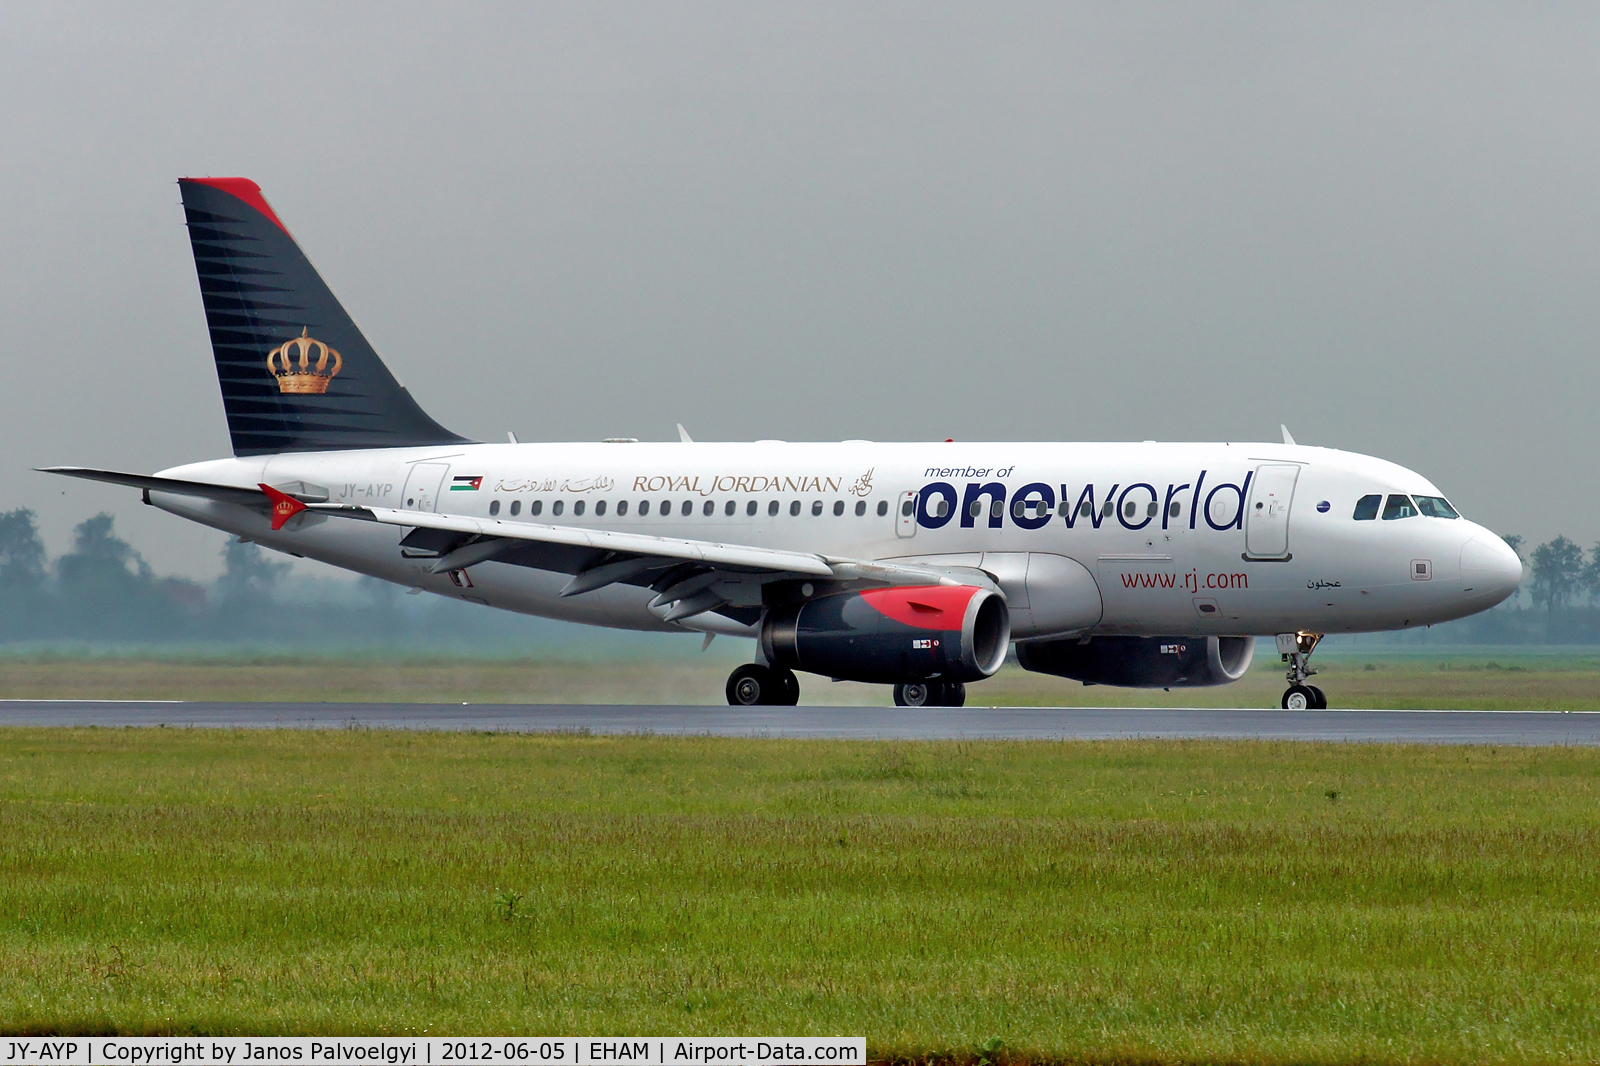 JY-AYP, 2009 Airbus A319-132 C/N 3832, Oneworld(Royal Jordanian Airline) A319-132 taxi in EHAM/AMS